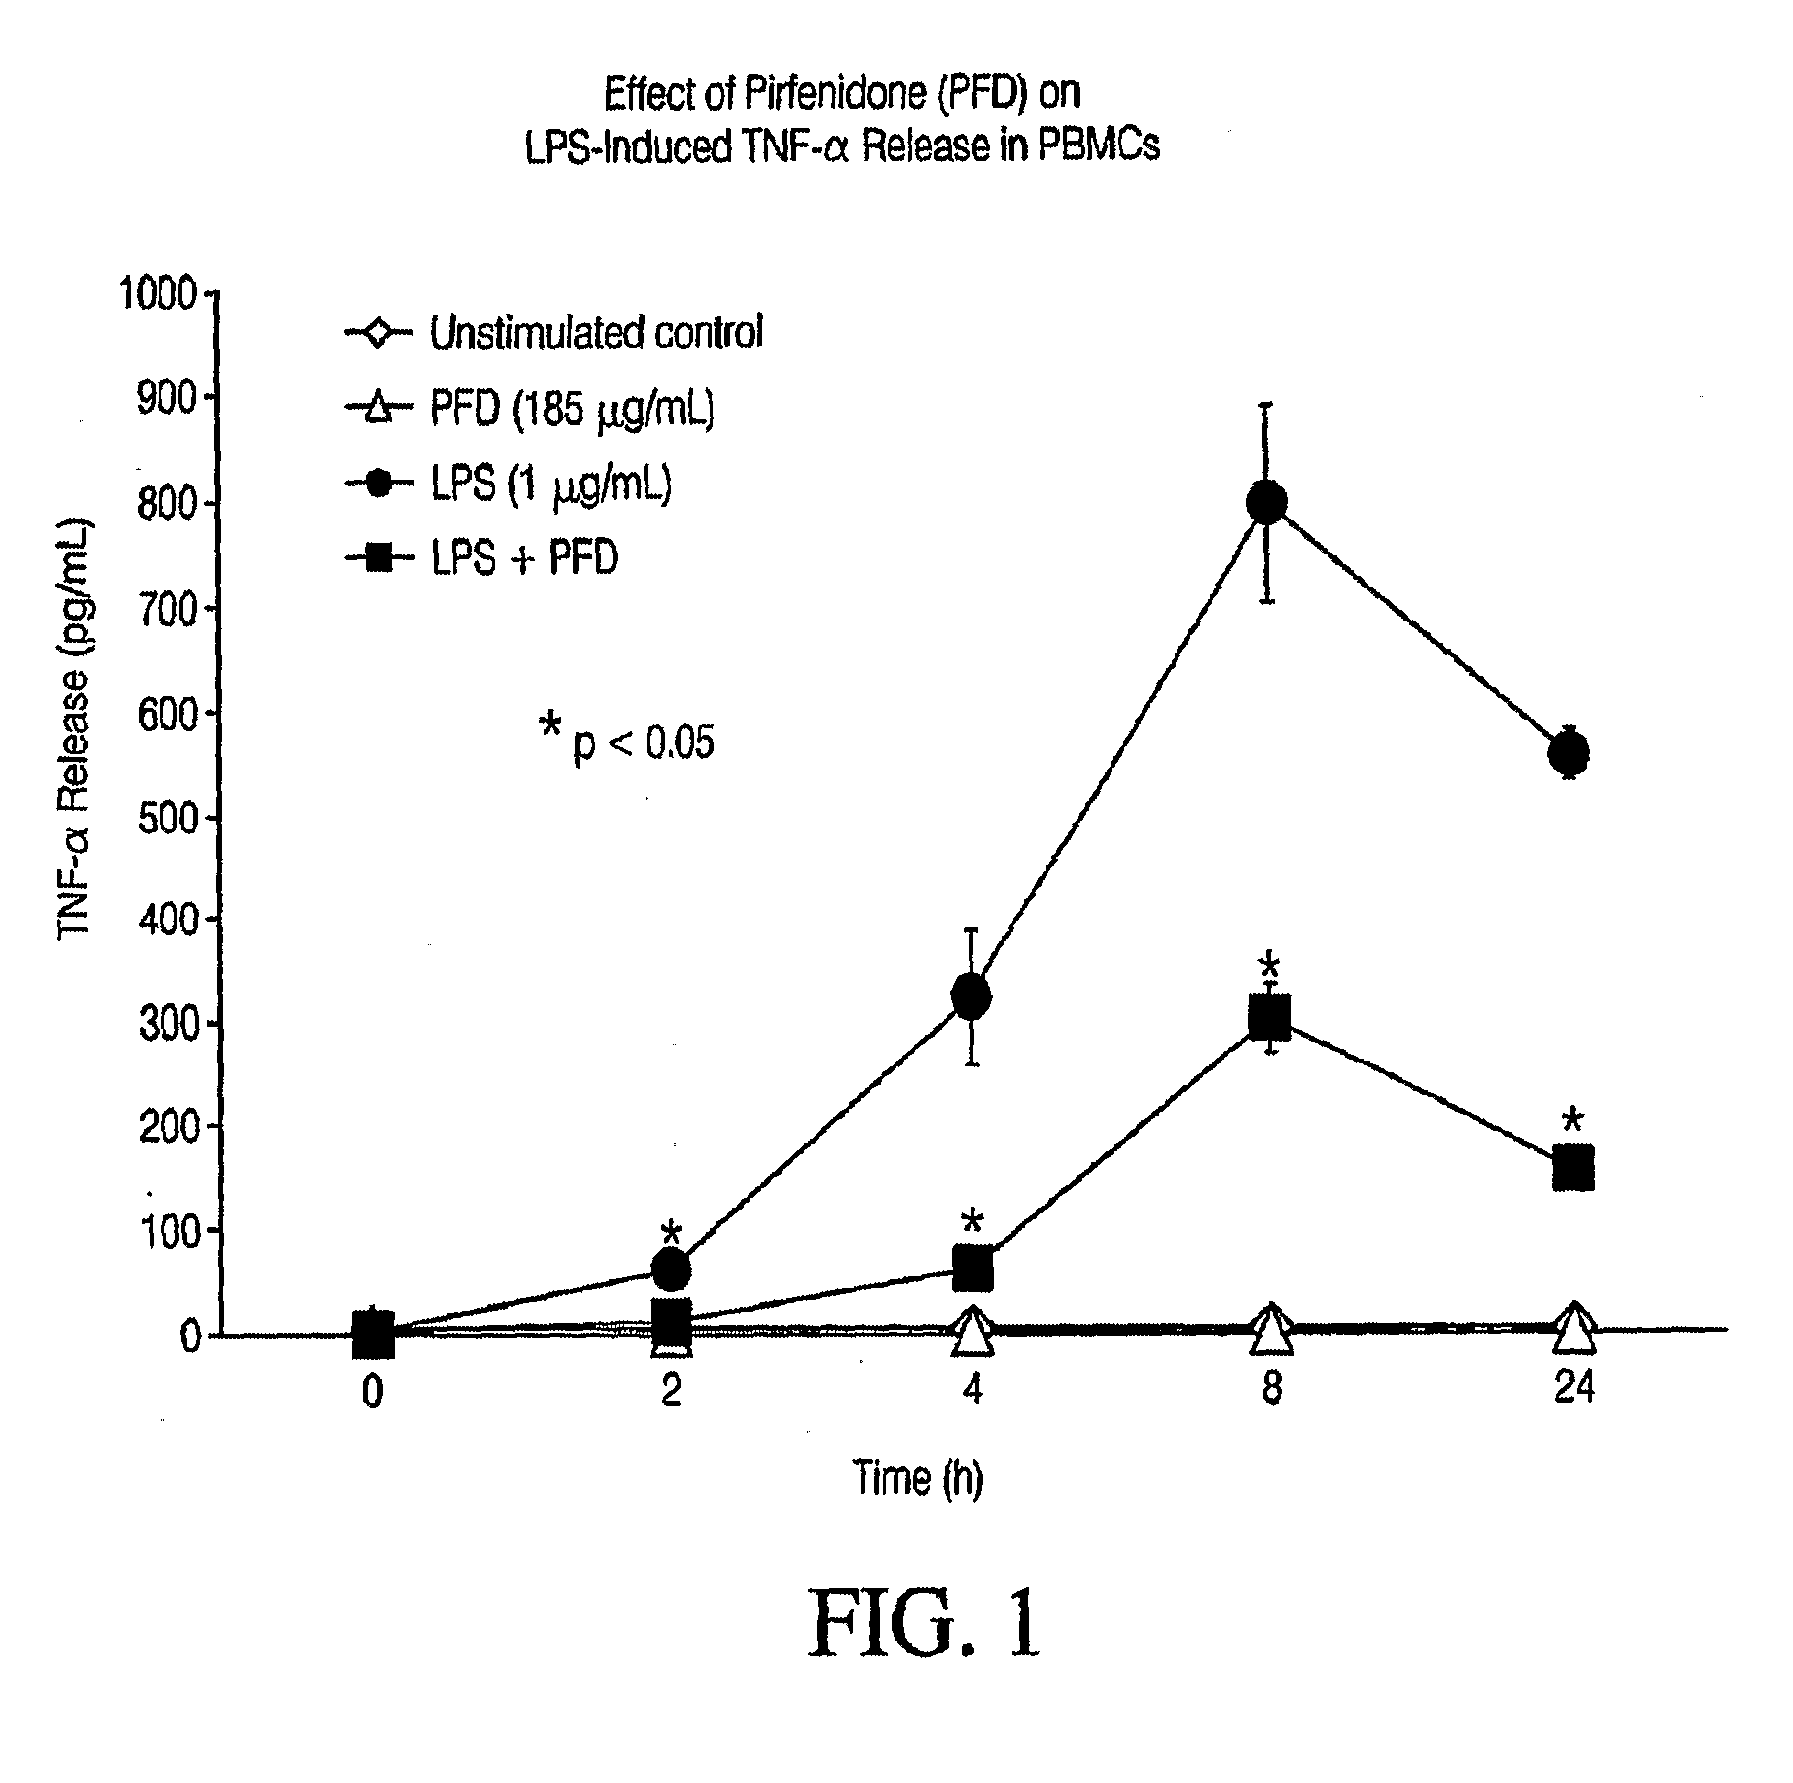 Pirfenidone/toll-like receptor (TLR) agonist compositions and methods for using them to stimulate production of granulocyte colonizing stimulating factor (g-csf)